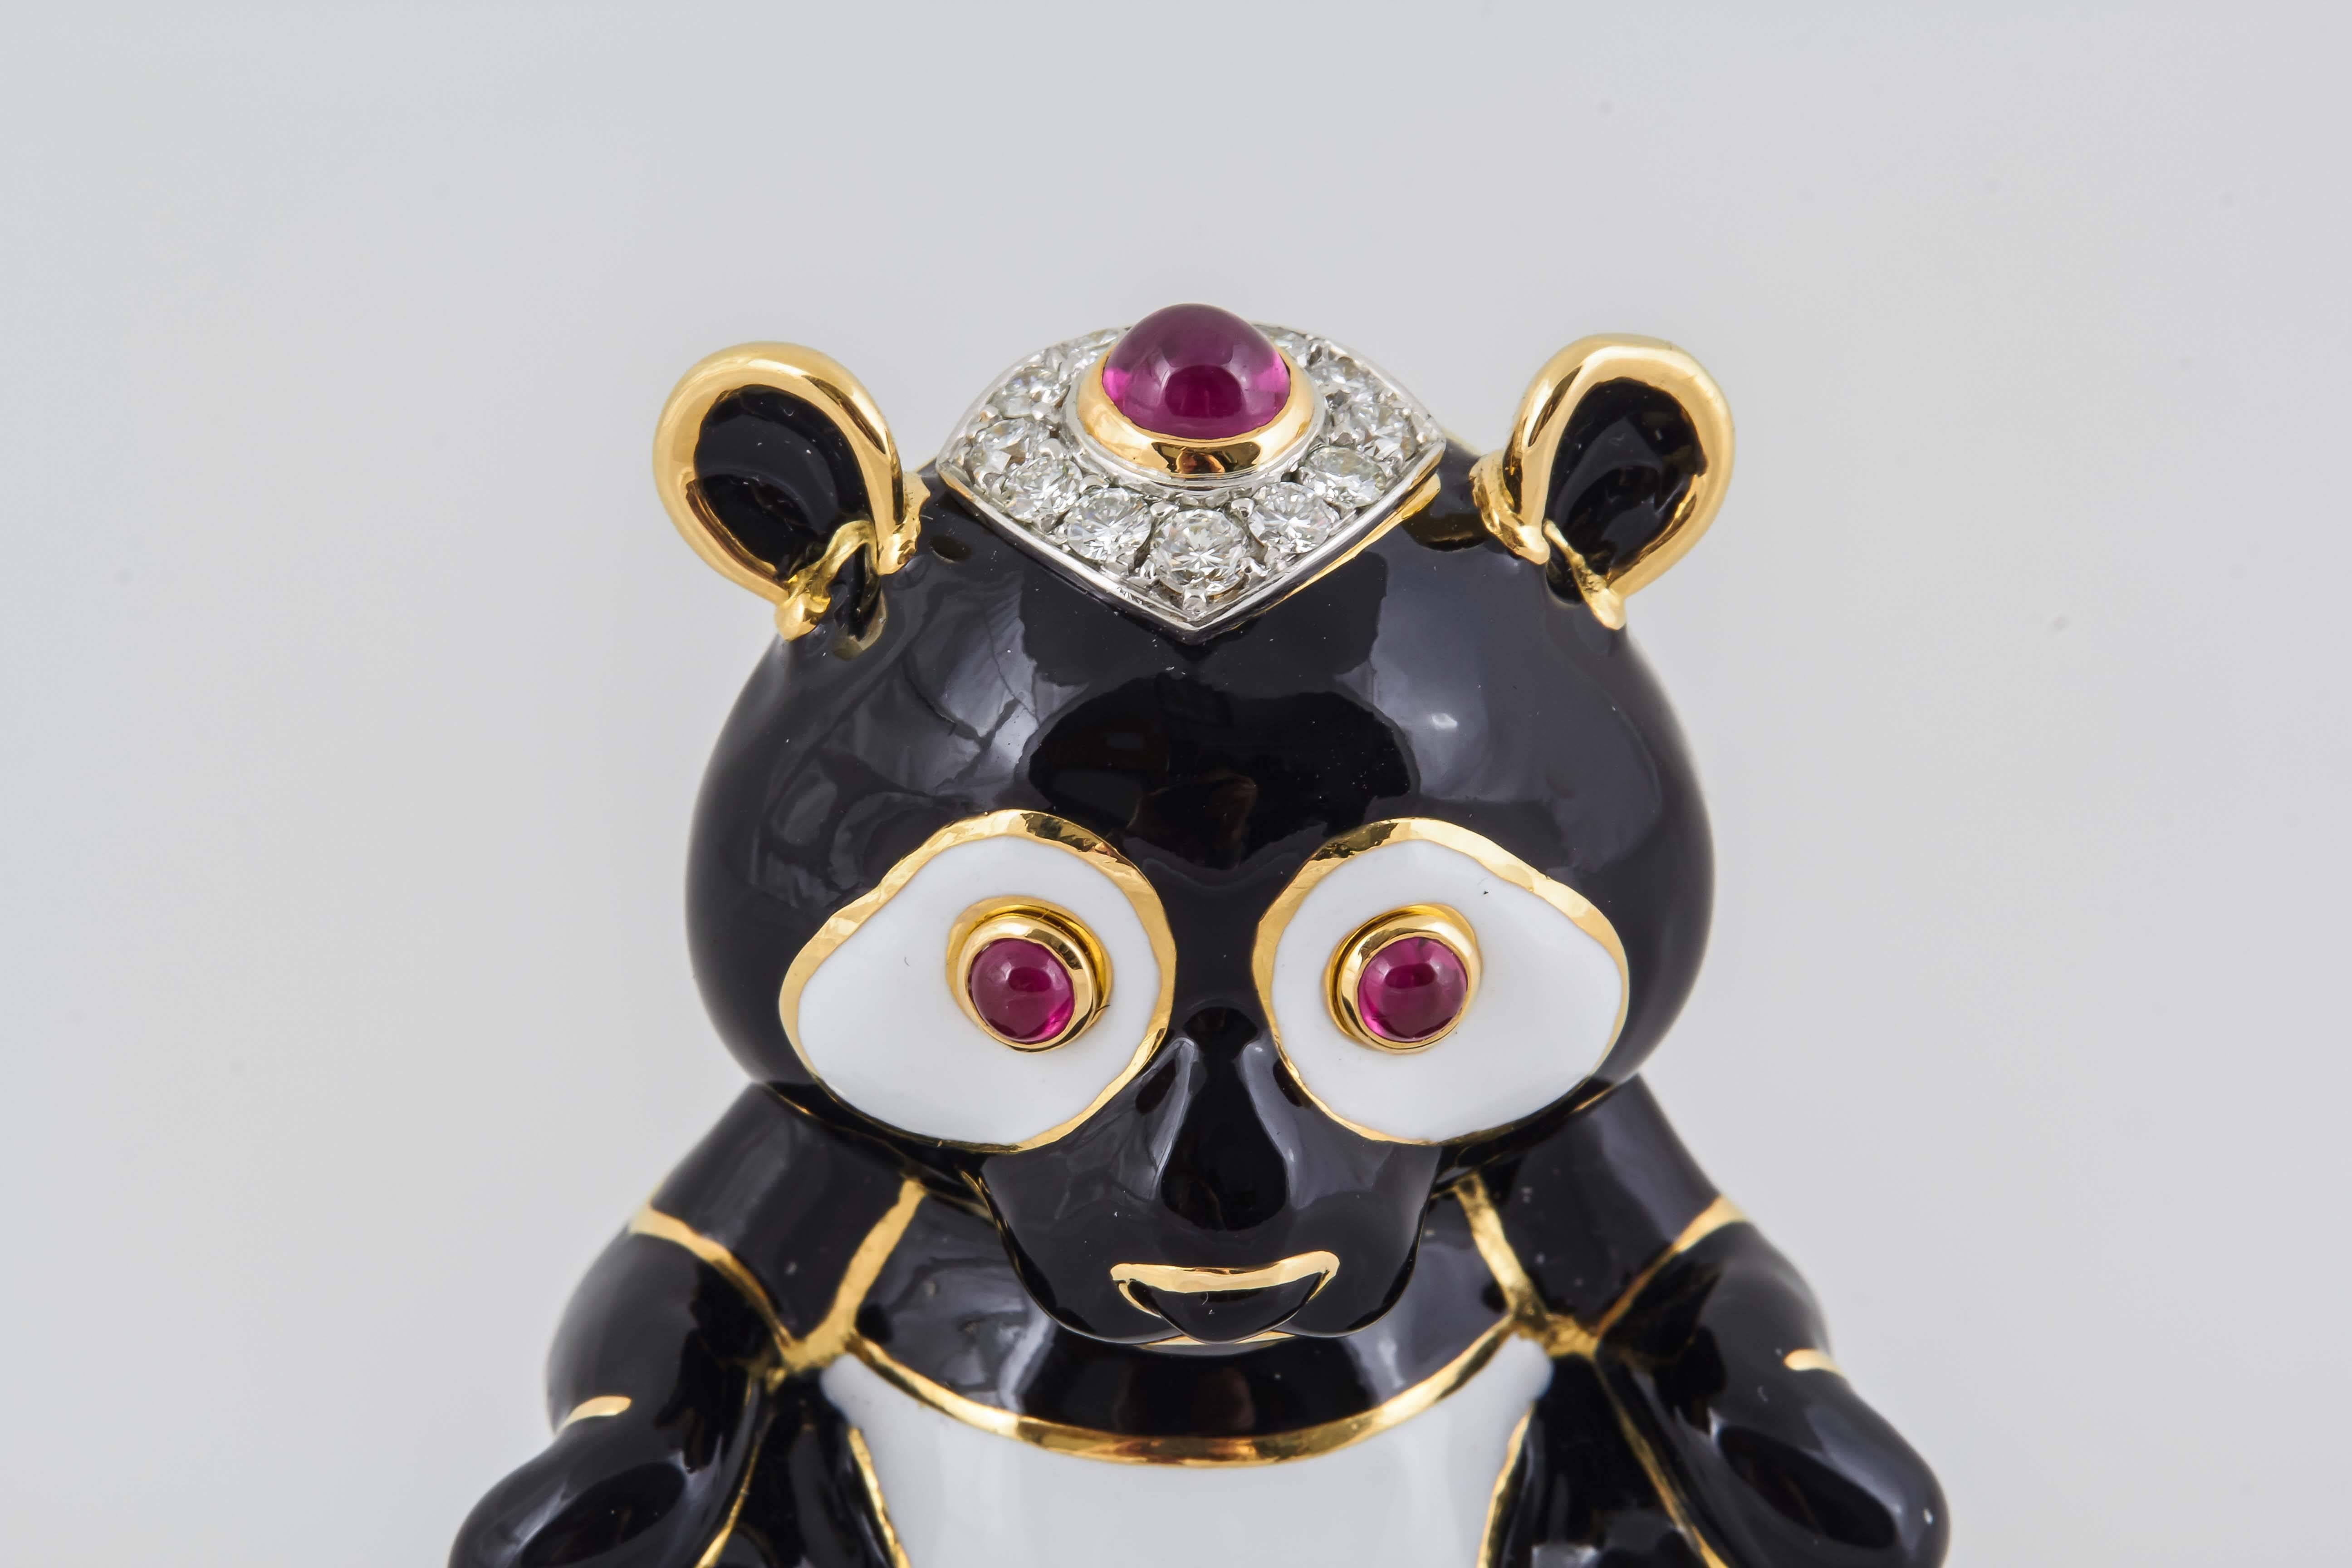 Beautiful Panda Brooch finely crafted in 18k yellow gold with black and white enamel, with diamonds and rubies, signed by David Webb.

